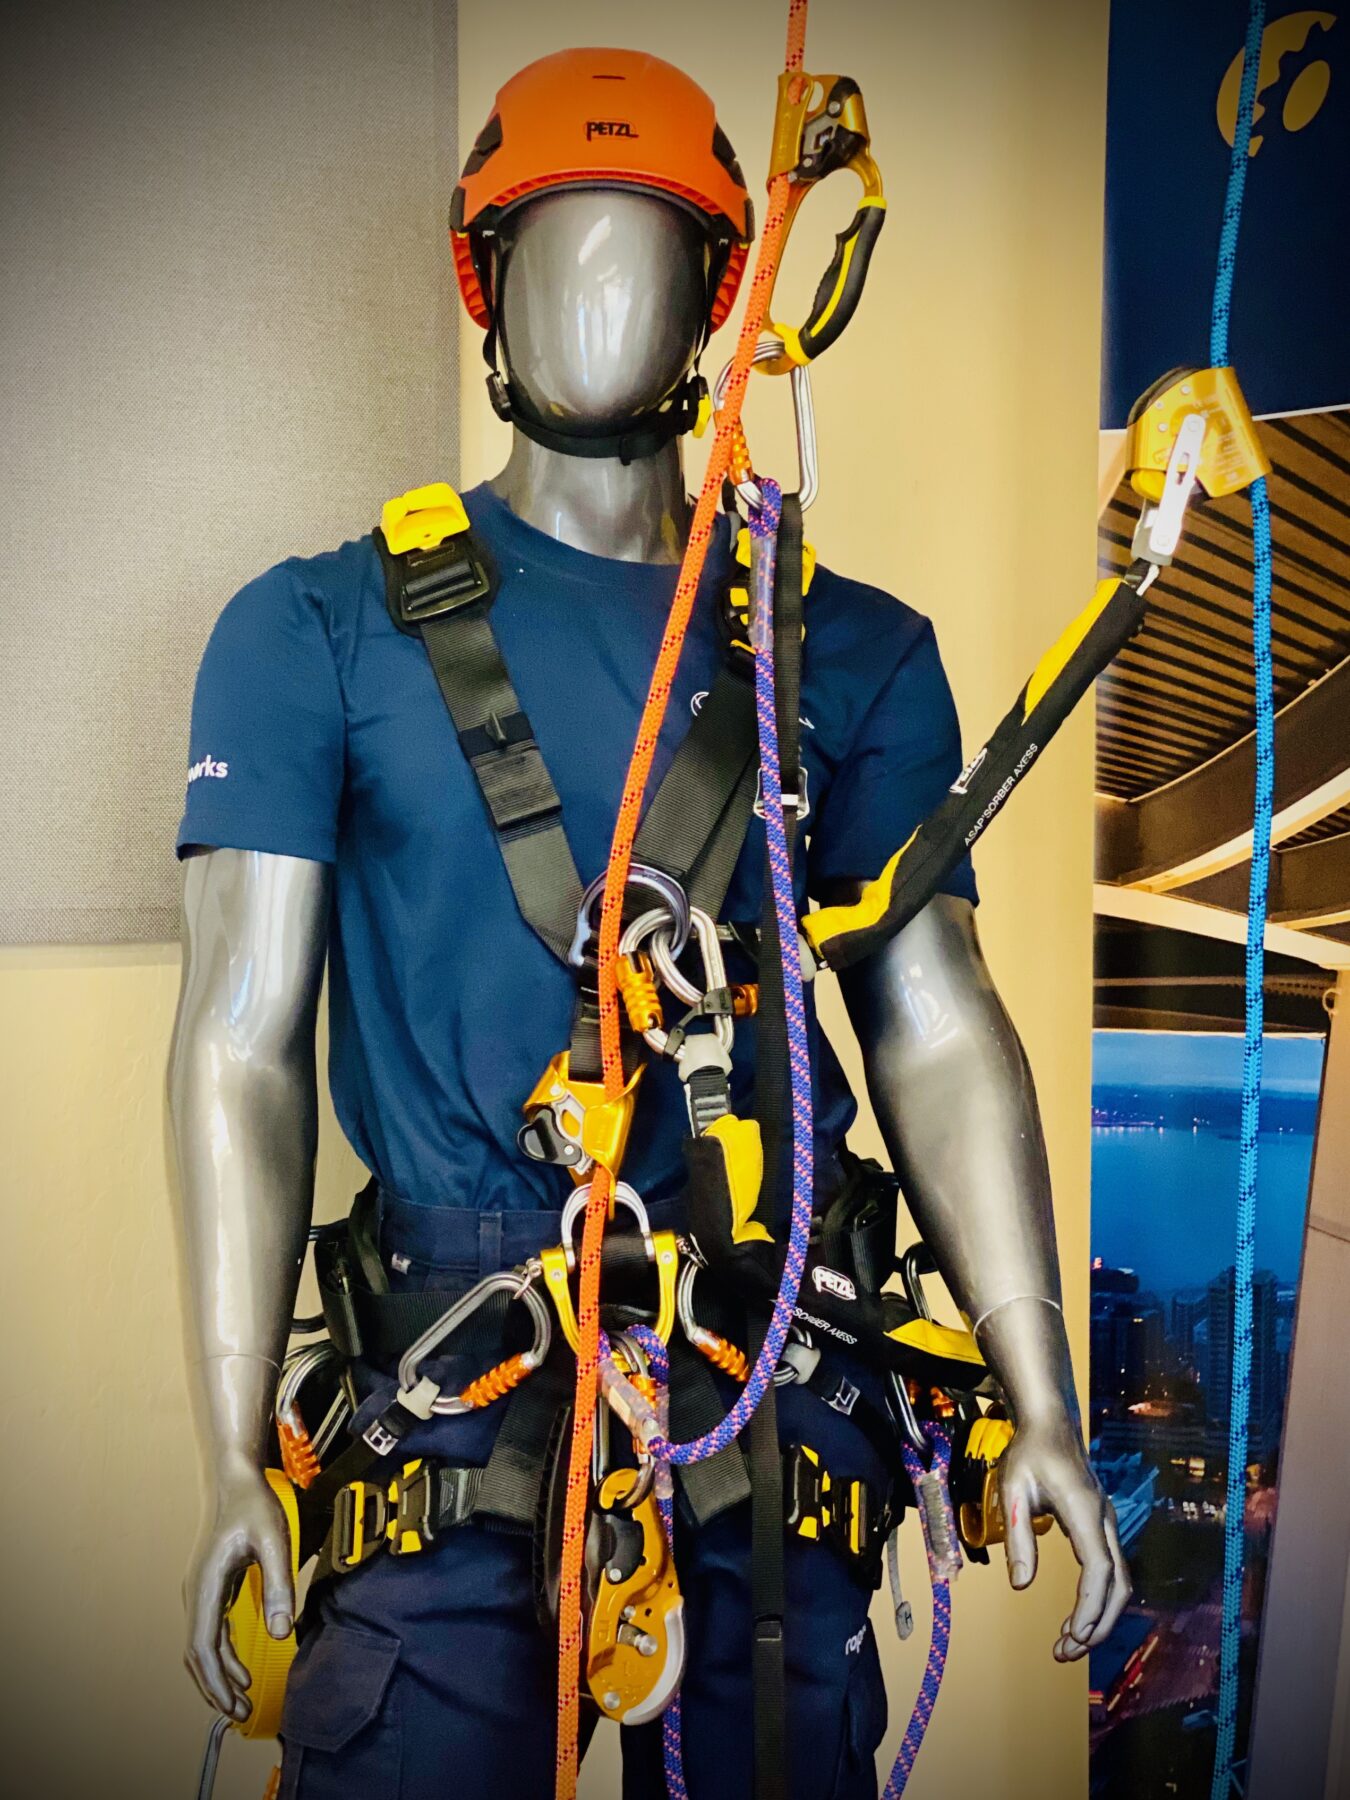 Petzl Technical Partner - MISTRAS/Ropeworks - fall protection equipment